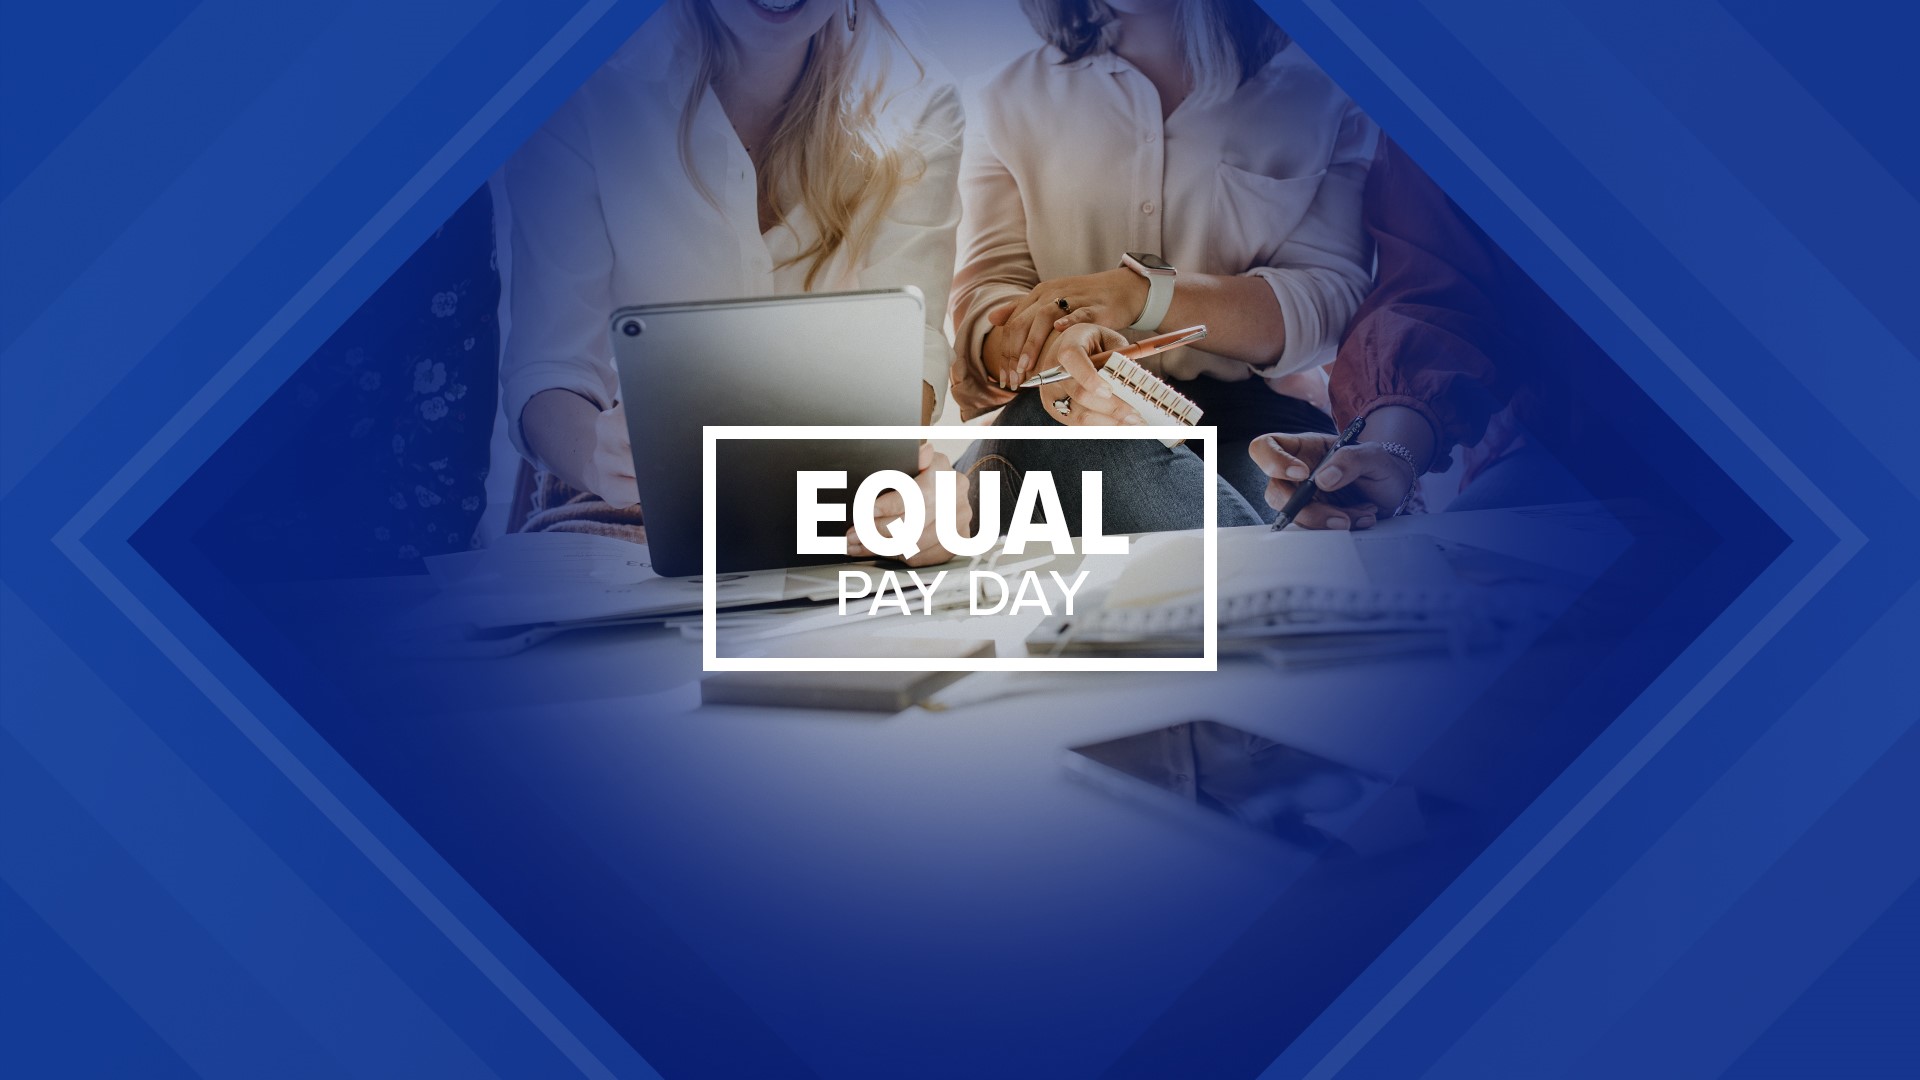 Tuesday is Equal Pay Day and Newswatch 16's Claire Alfree spoke with the Schuylkill Chamber of Commerce about efforts to support women in business.